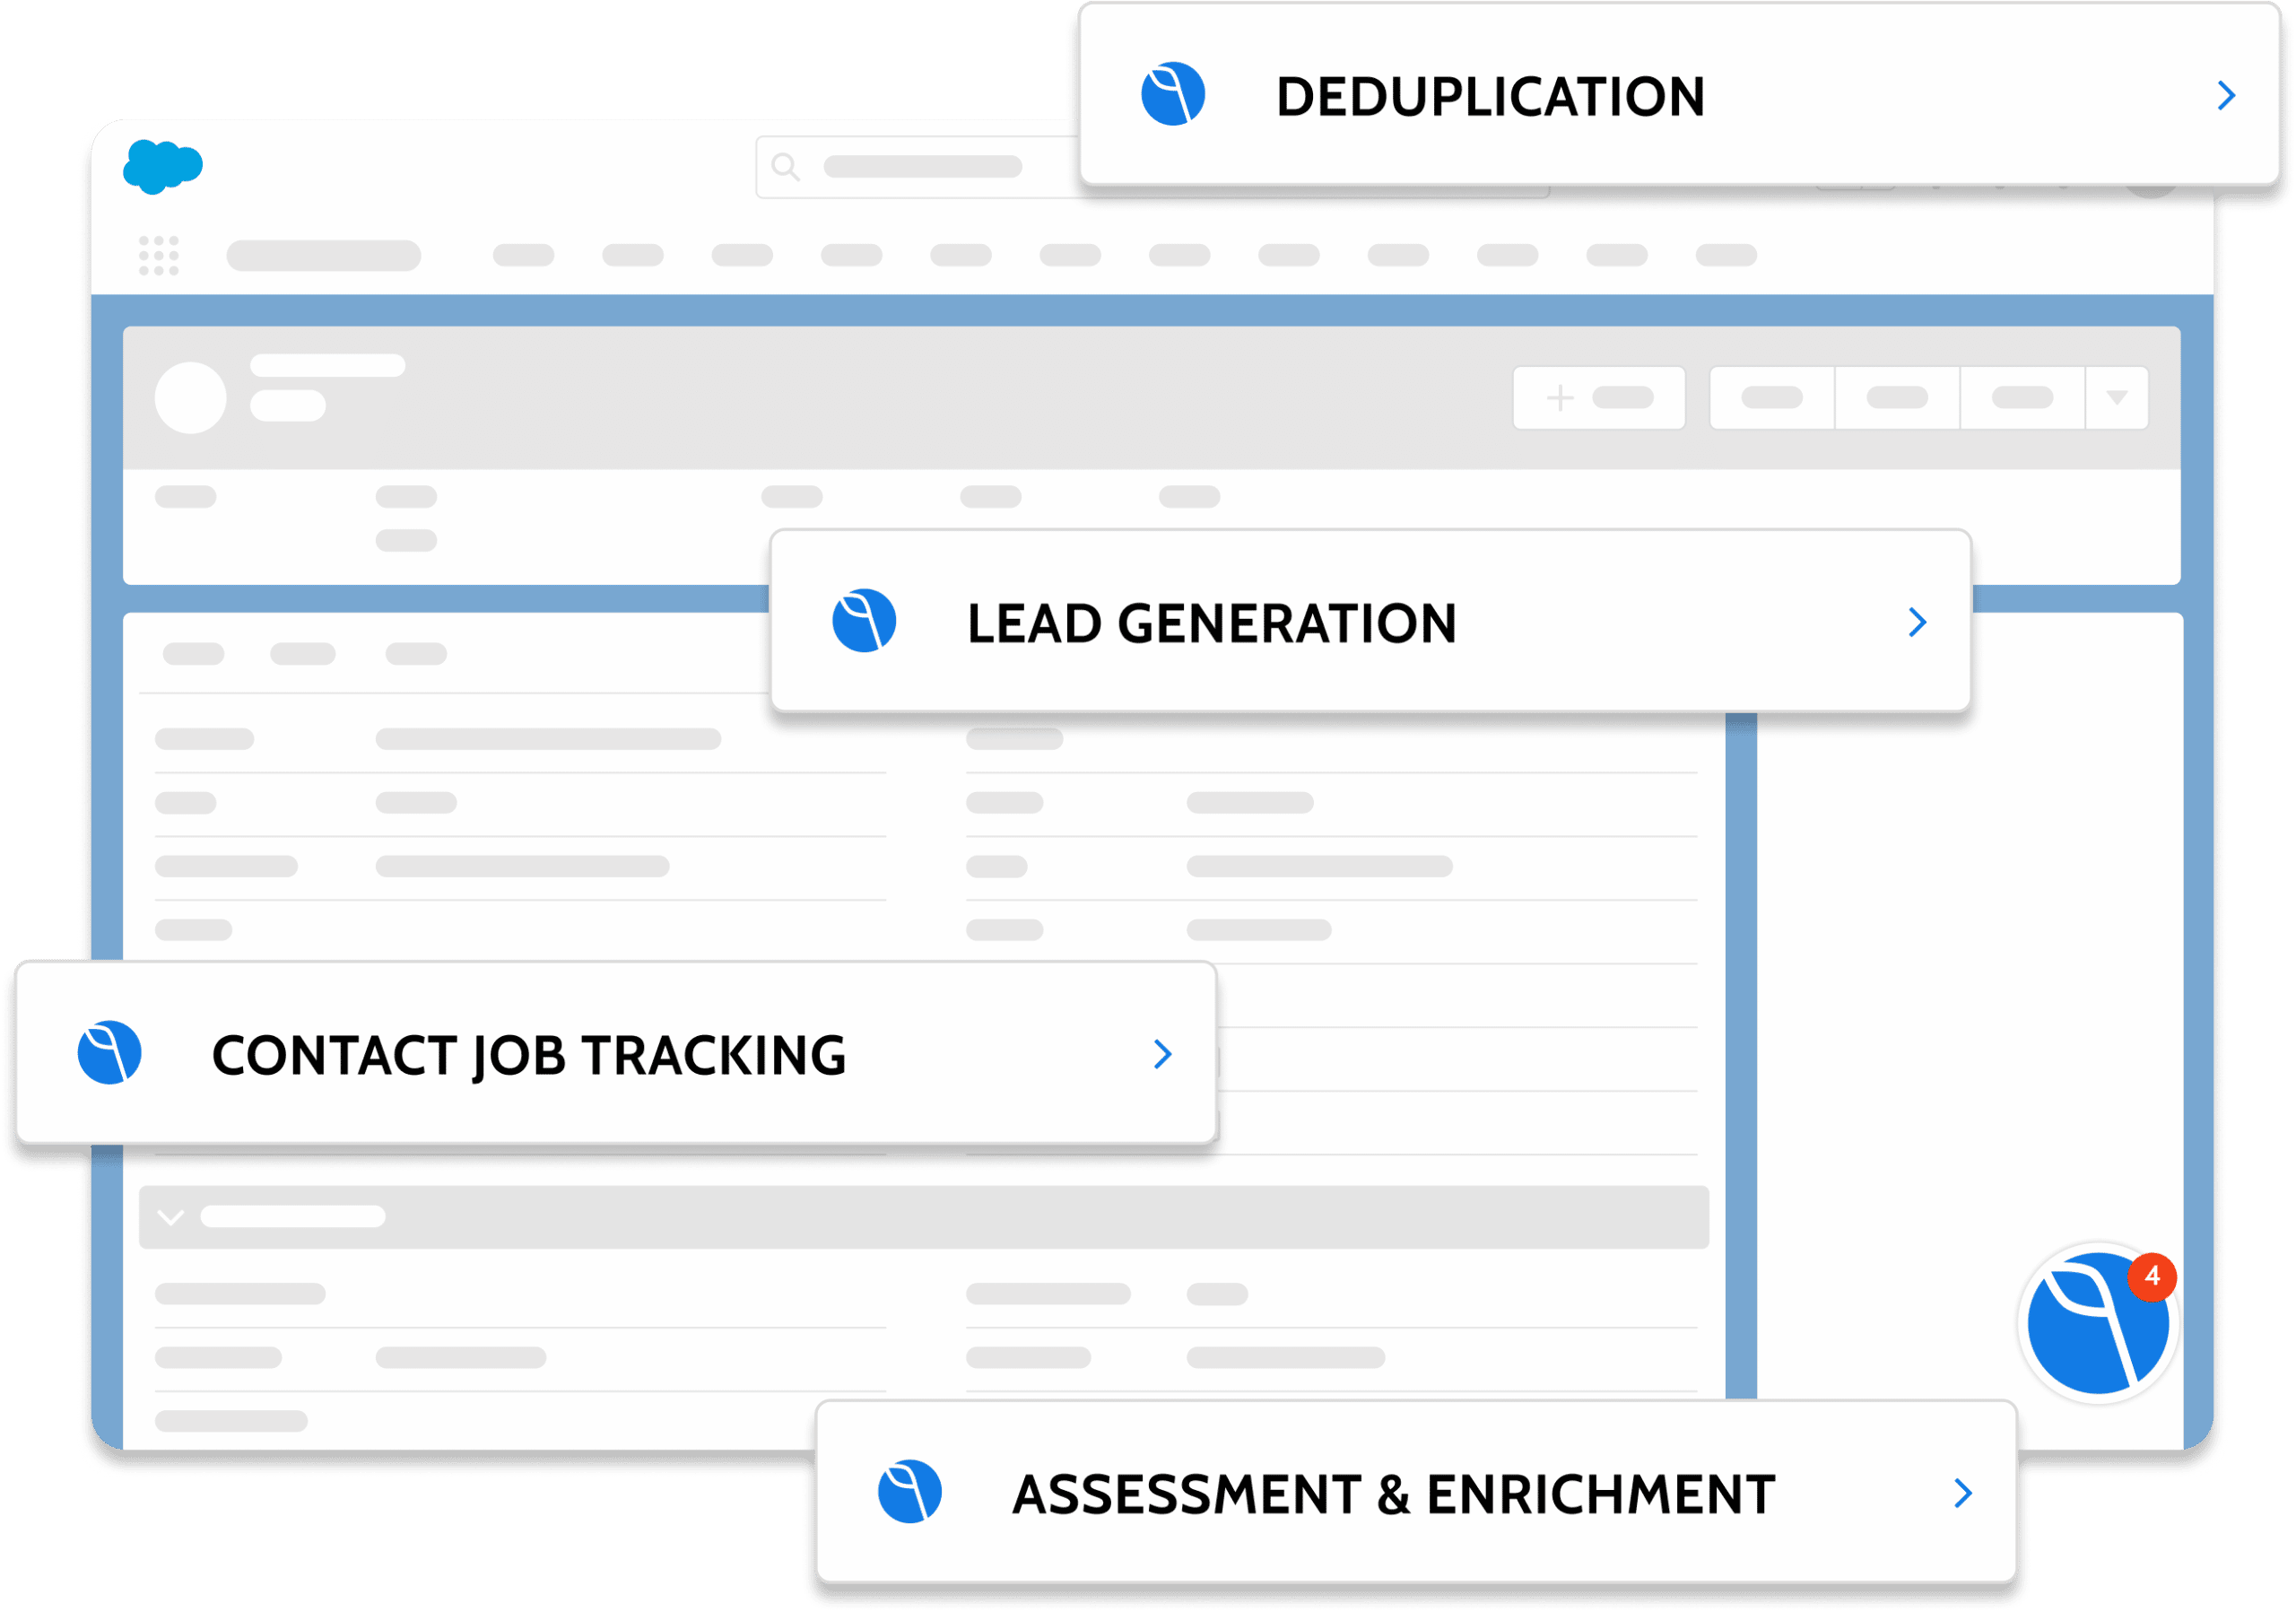 Graphic representation of Delpha and its key product features on Salesforce including deduplication, lead generation, contact job tracking and assessment